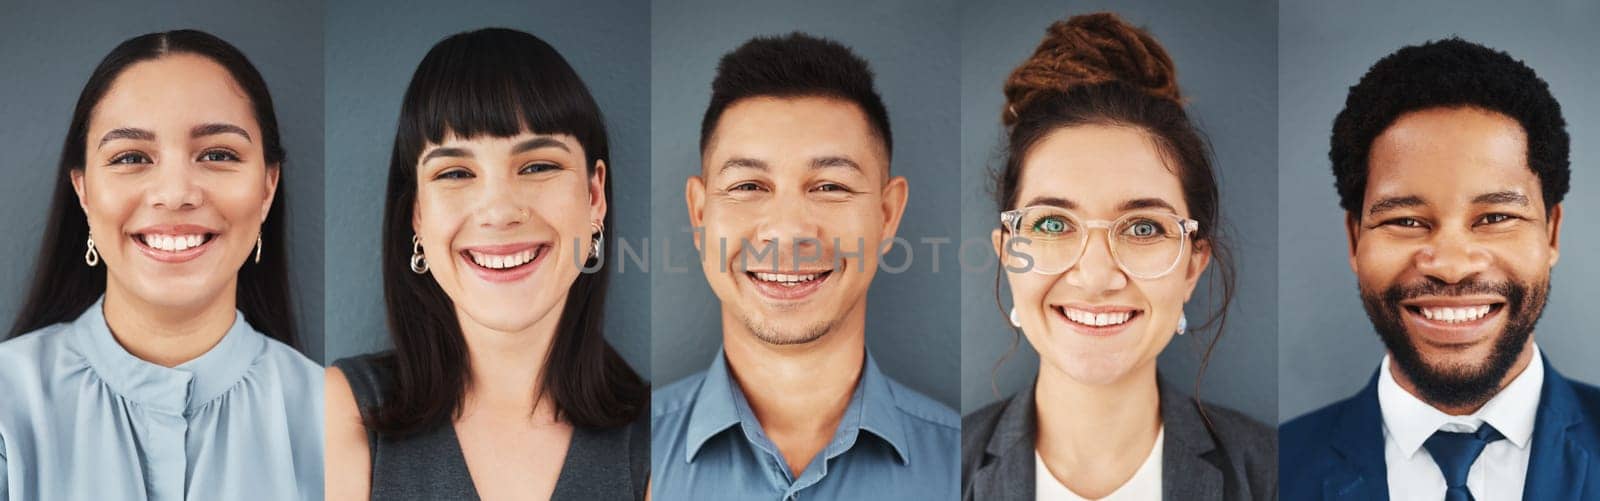 Collage, portrait and face of business people with smile, professional group and headshot on studio background. Diversity, employees and composite of happy corporate teamwork, global company or trust by YuriArcurs